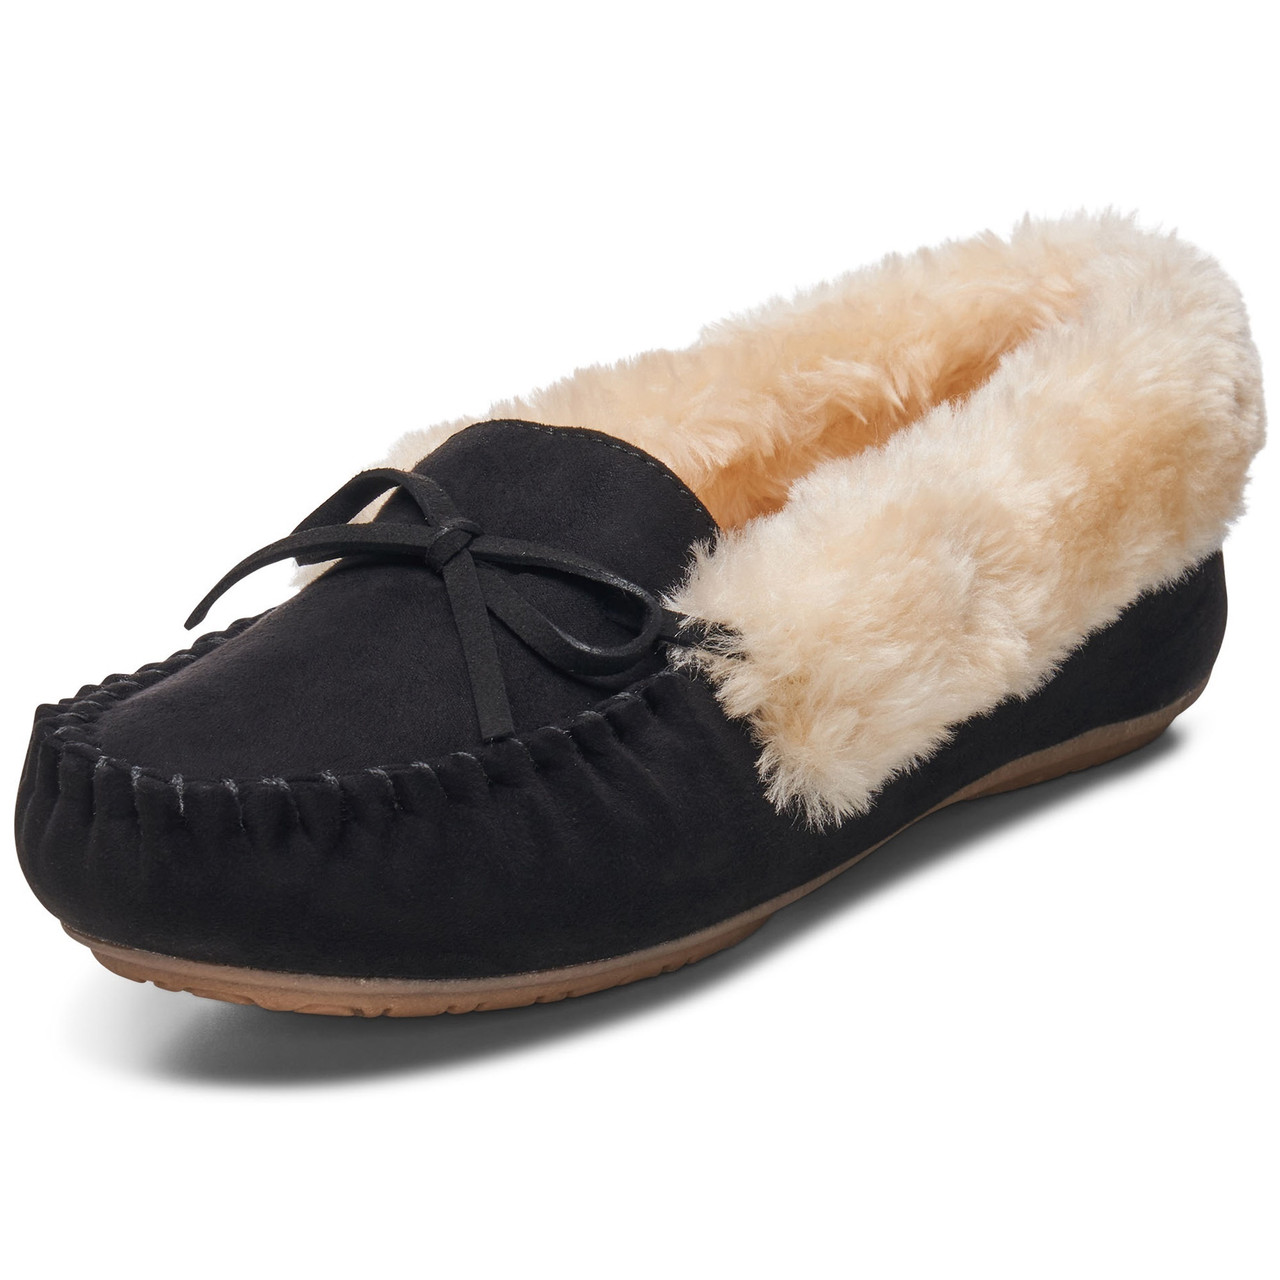 Swiss Leah Shearling Moccasin Slippers Faux Fur Slip On House Shoes - Alpine Swiss